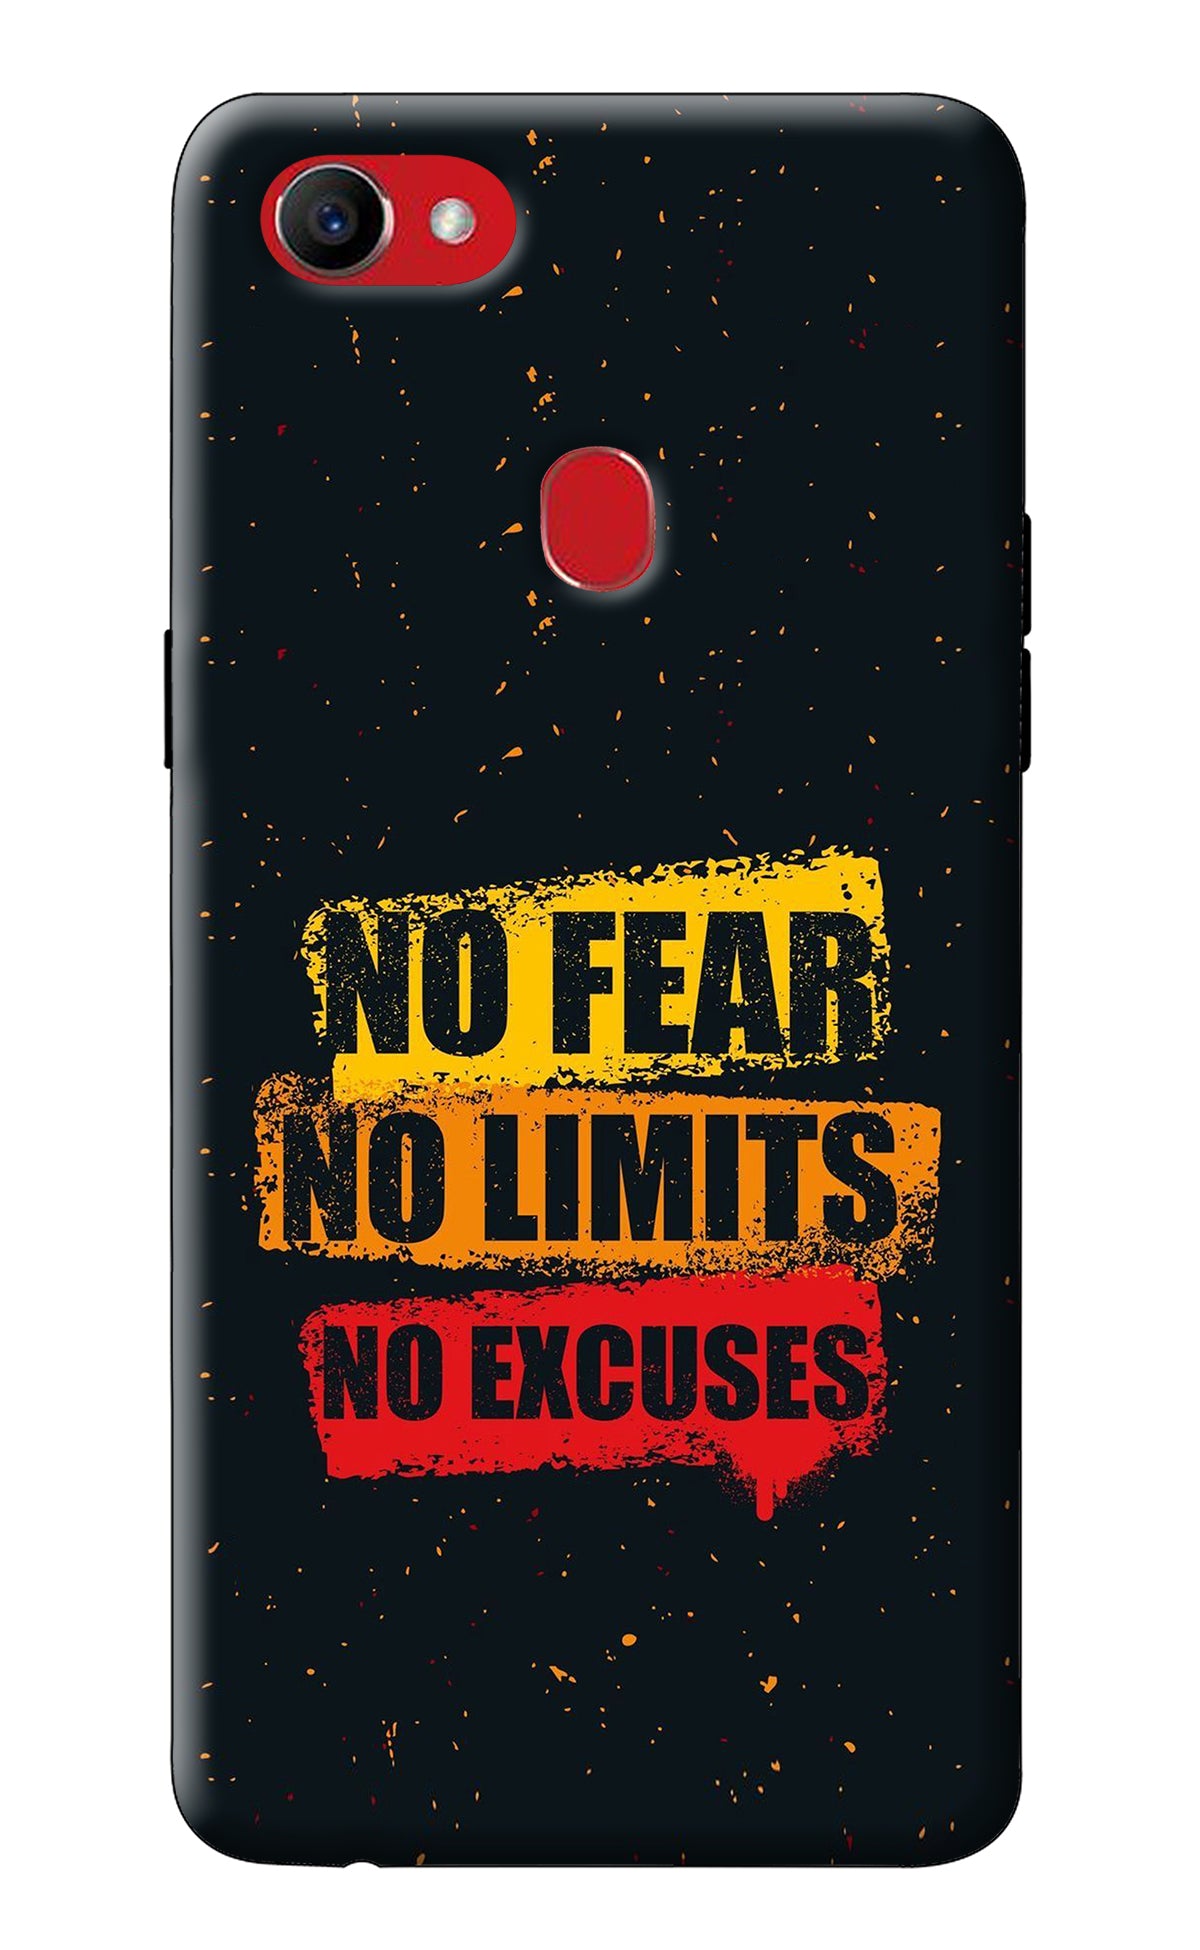 No Fear No Limits No Excuse Oppo F7 Back Cover